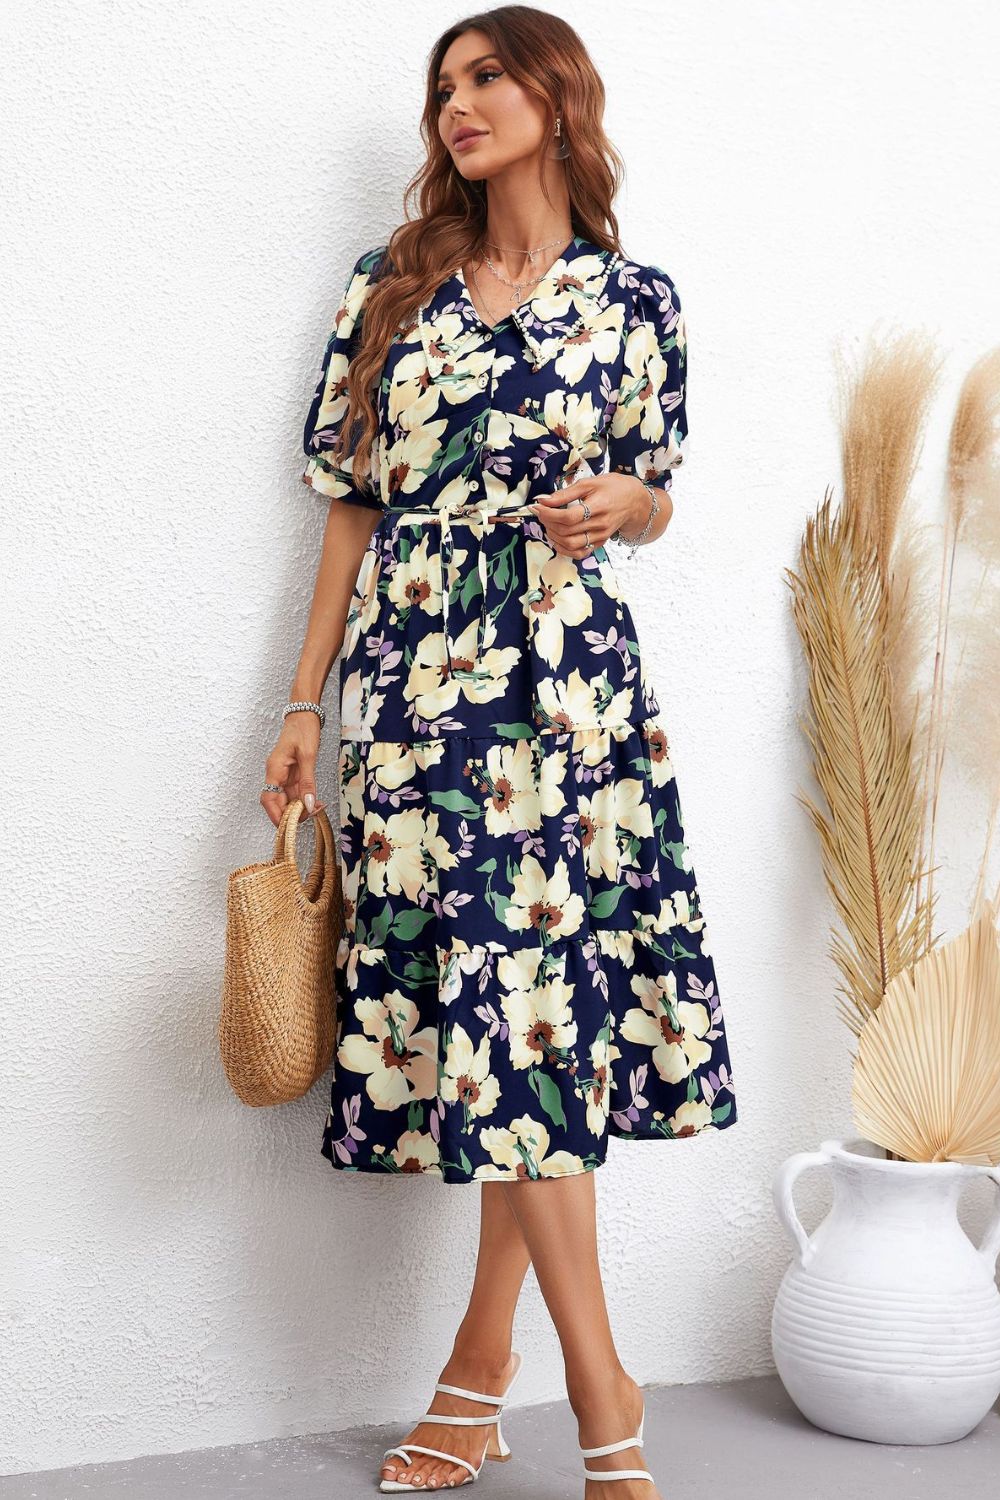 Summer Chic: Floral Collared Neck Tiered Midi Dress for Beach Wedding Guests and Party-Goers